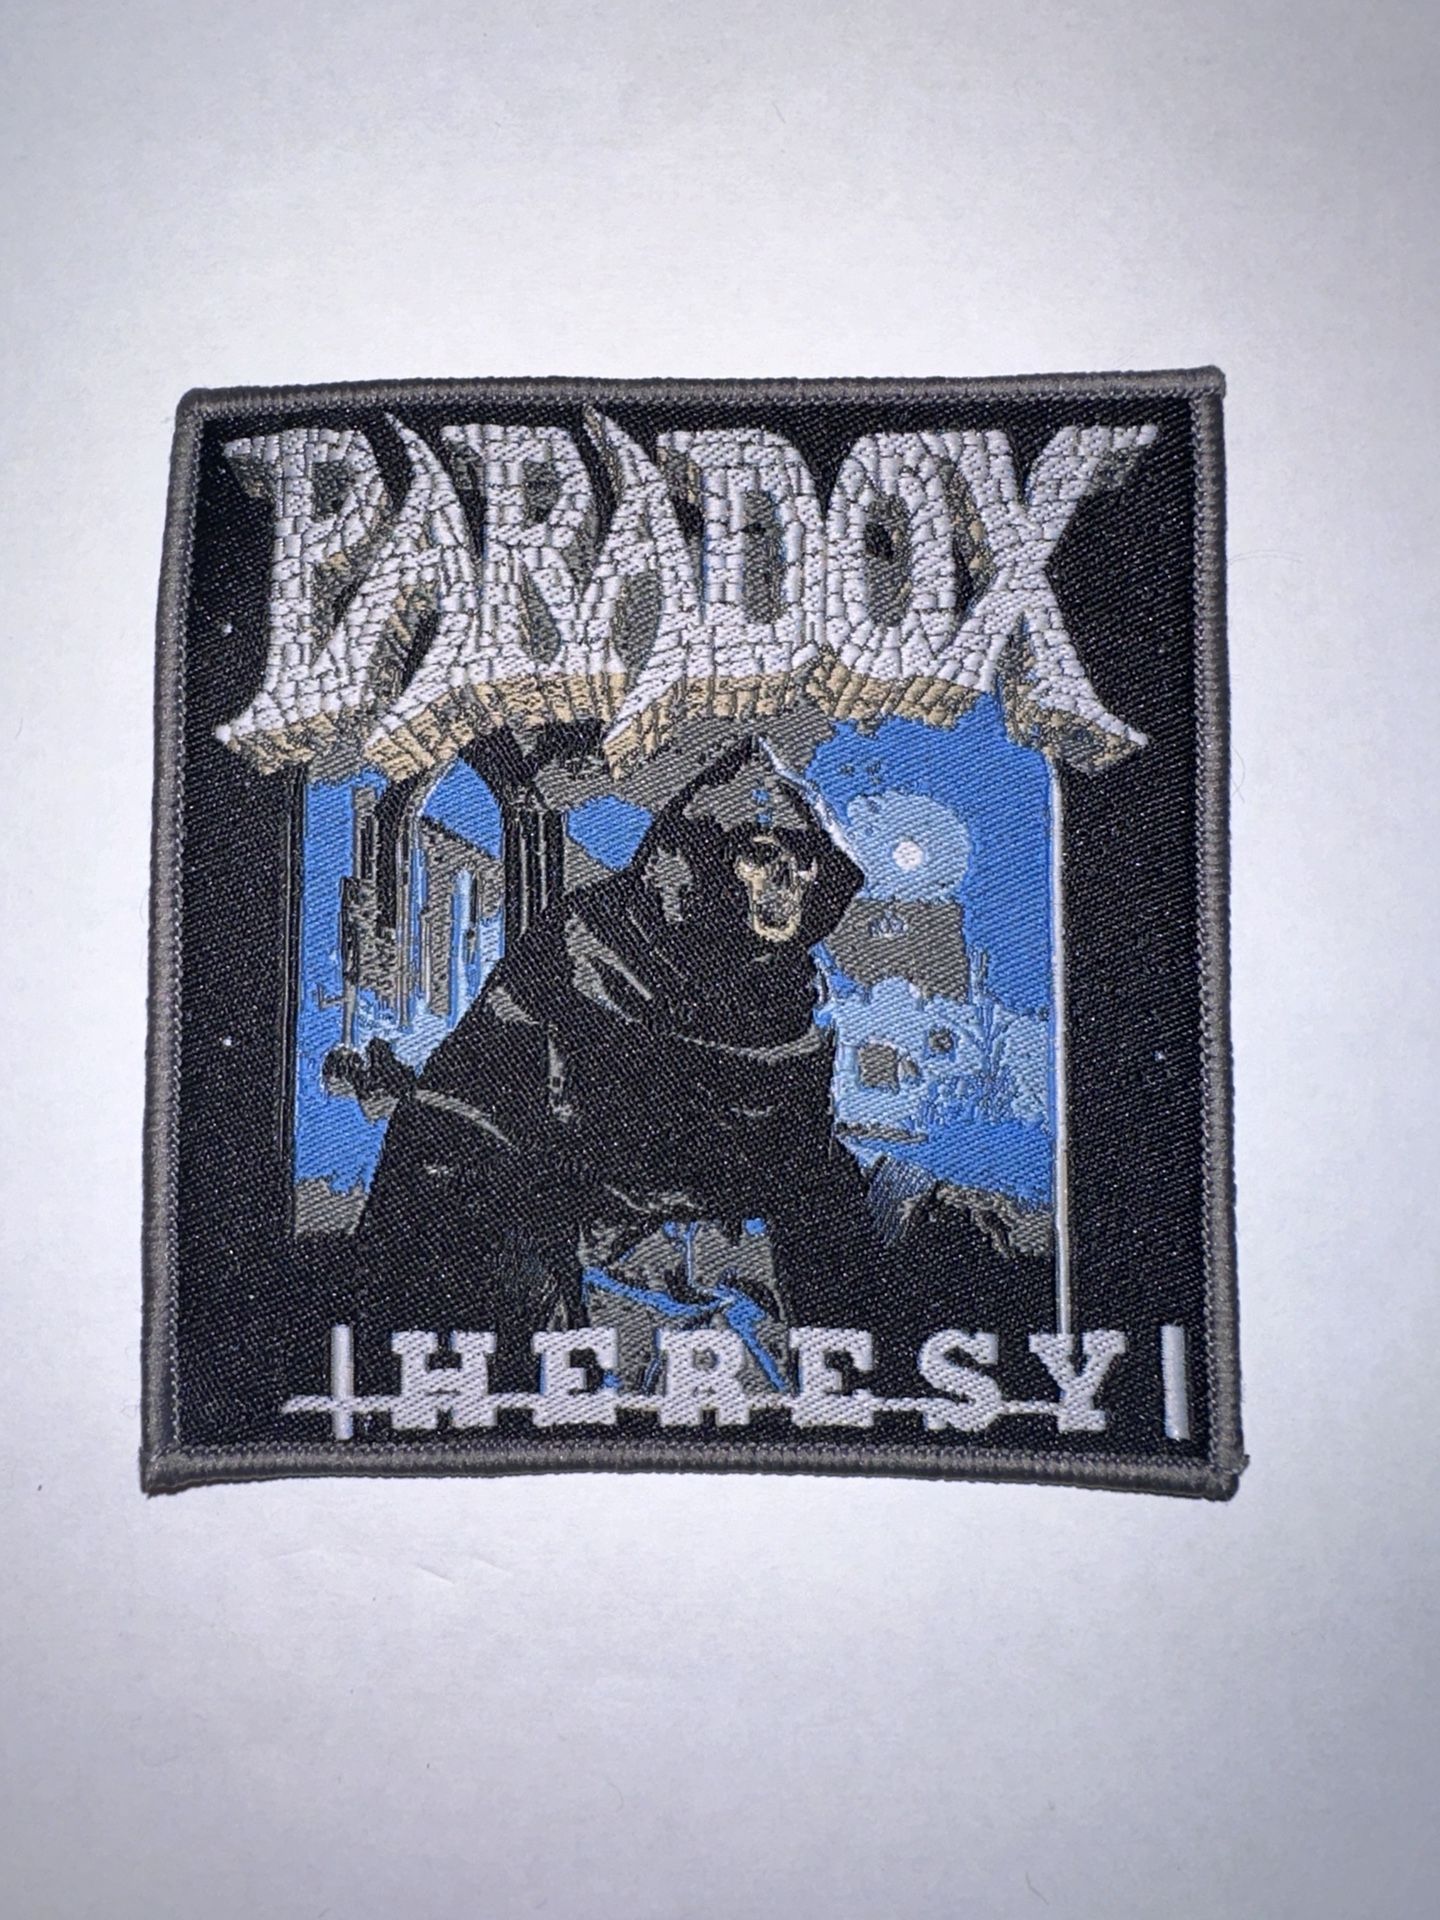 PARADOX, HERESY, SEW ON GRAY BORDER WOVEN PATCH